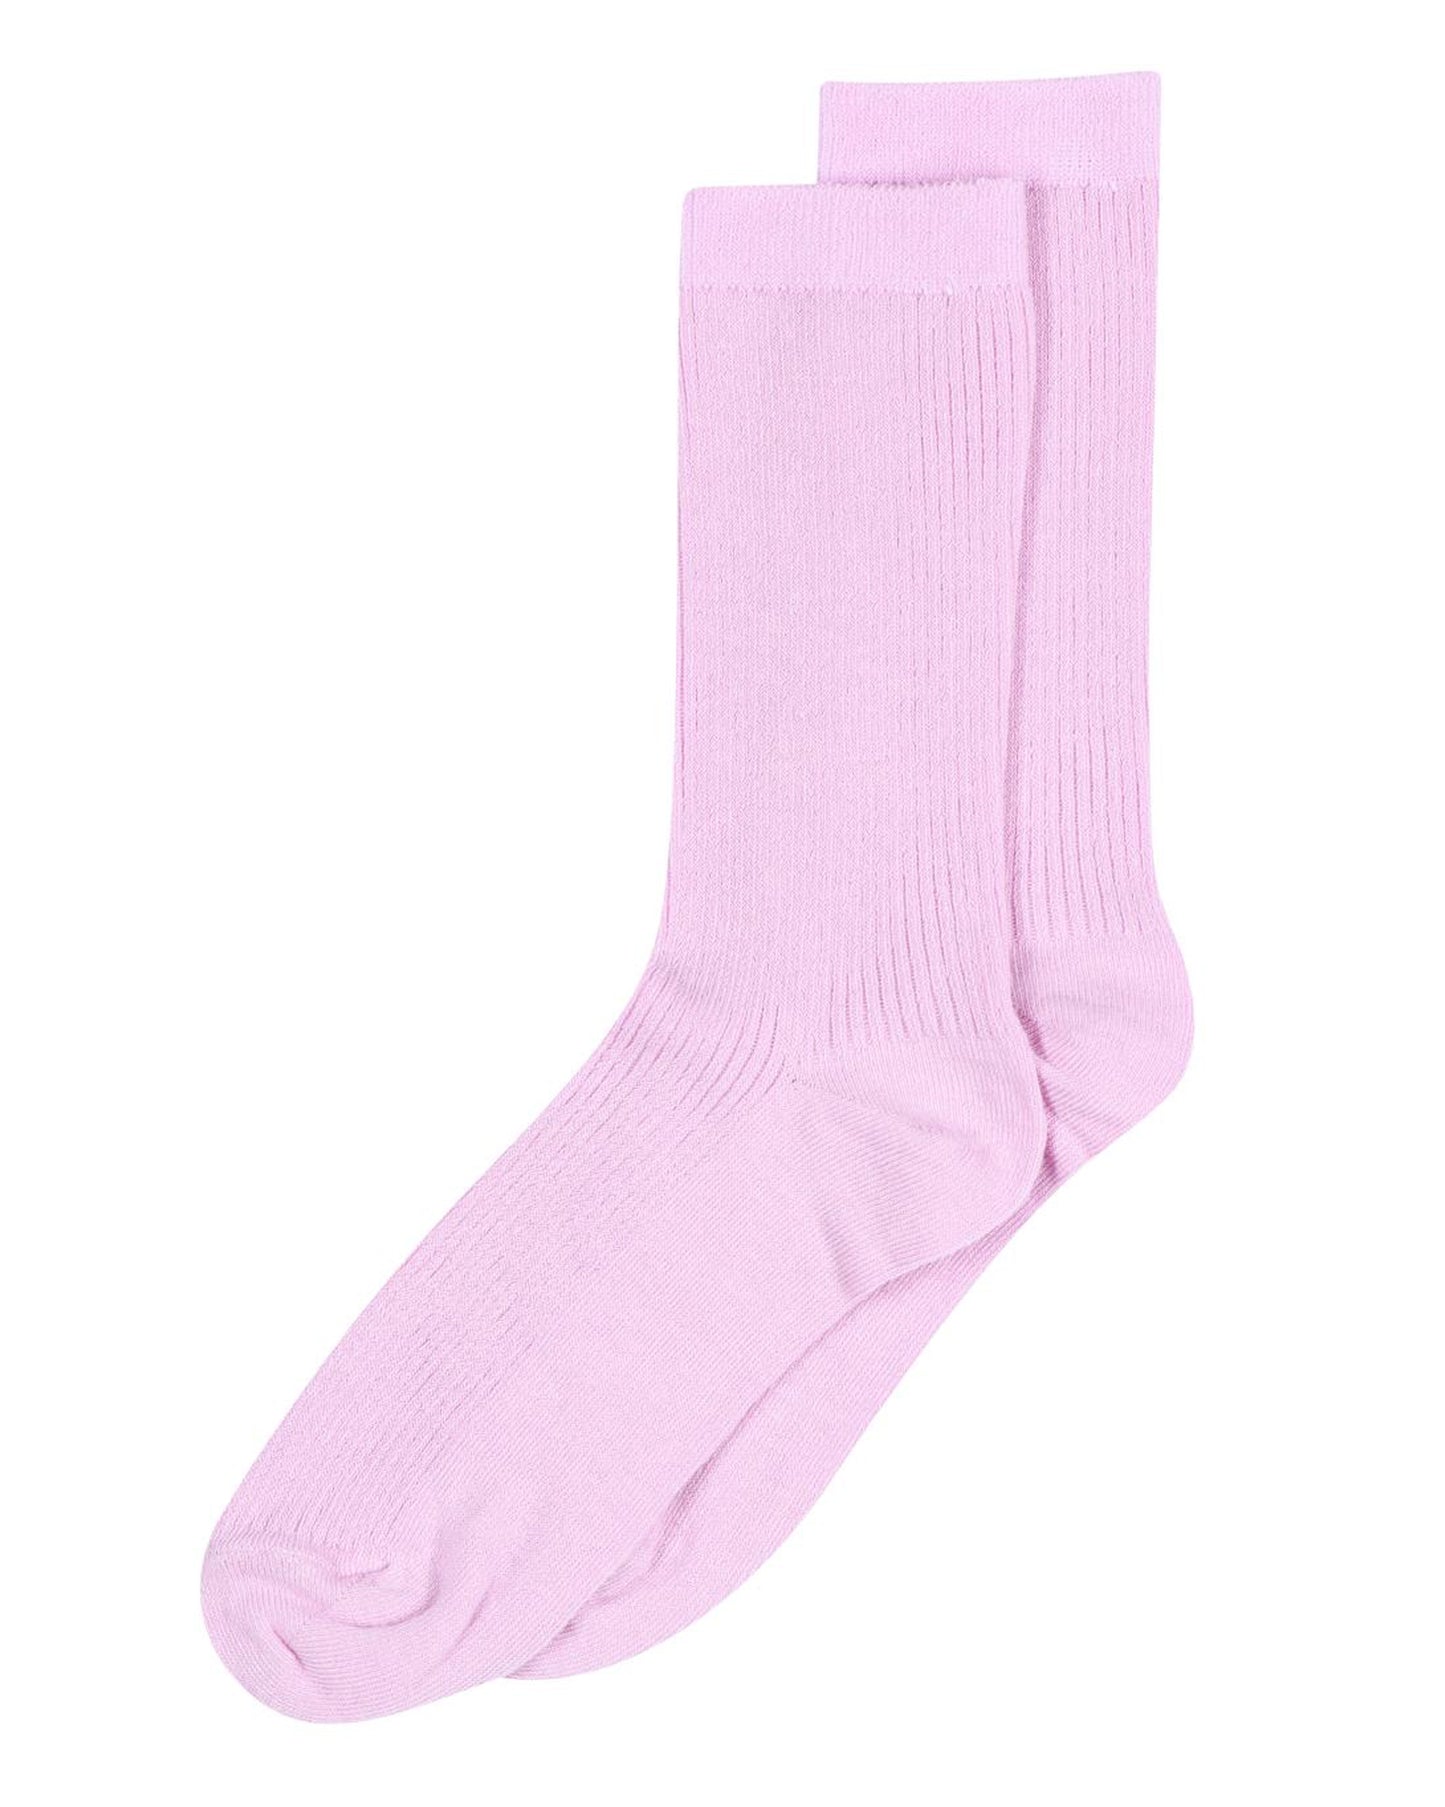 MP Denmark Fine Cotton Rib Sock - Soft and light candy pastel pink ribbed cotton crew length ankle socks with plain cuff, plain sole, shaped heel and flat toe seam.